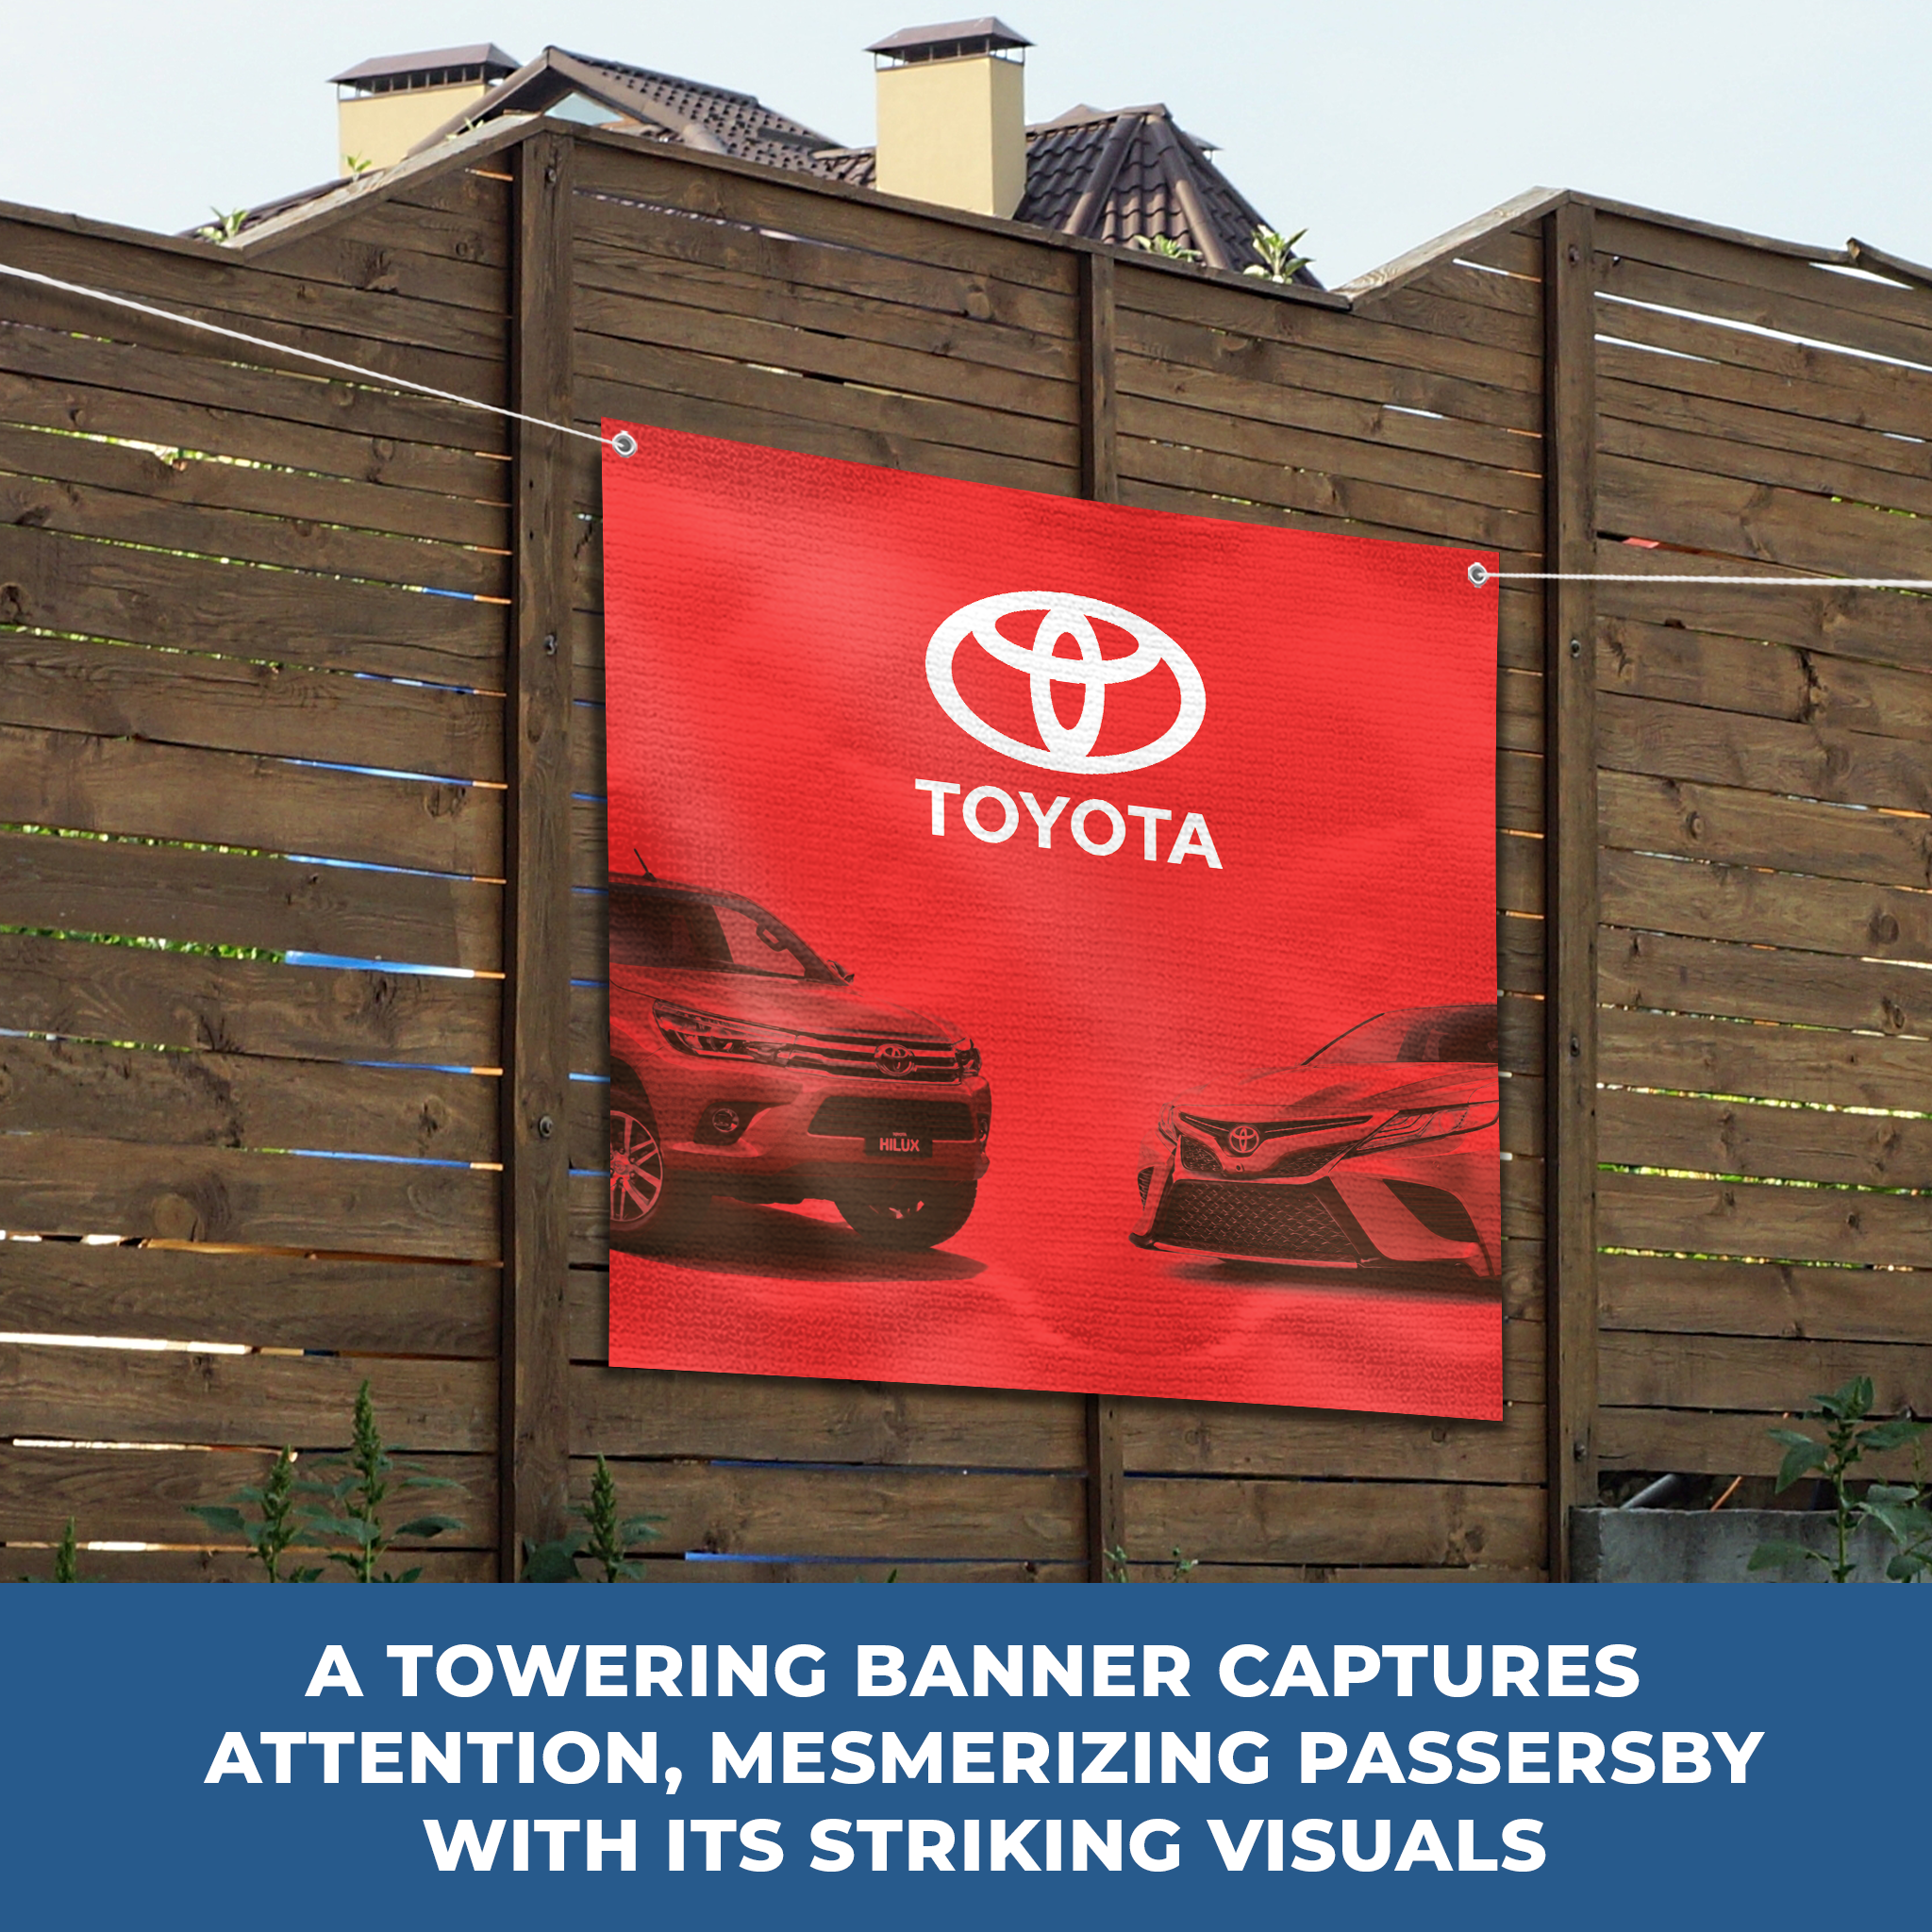 Toyota Large Banner